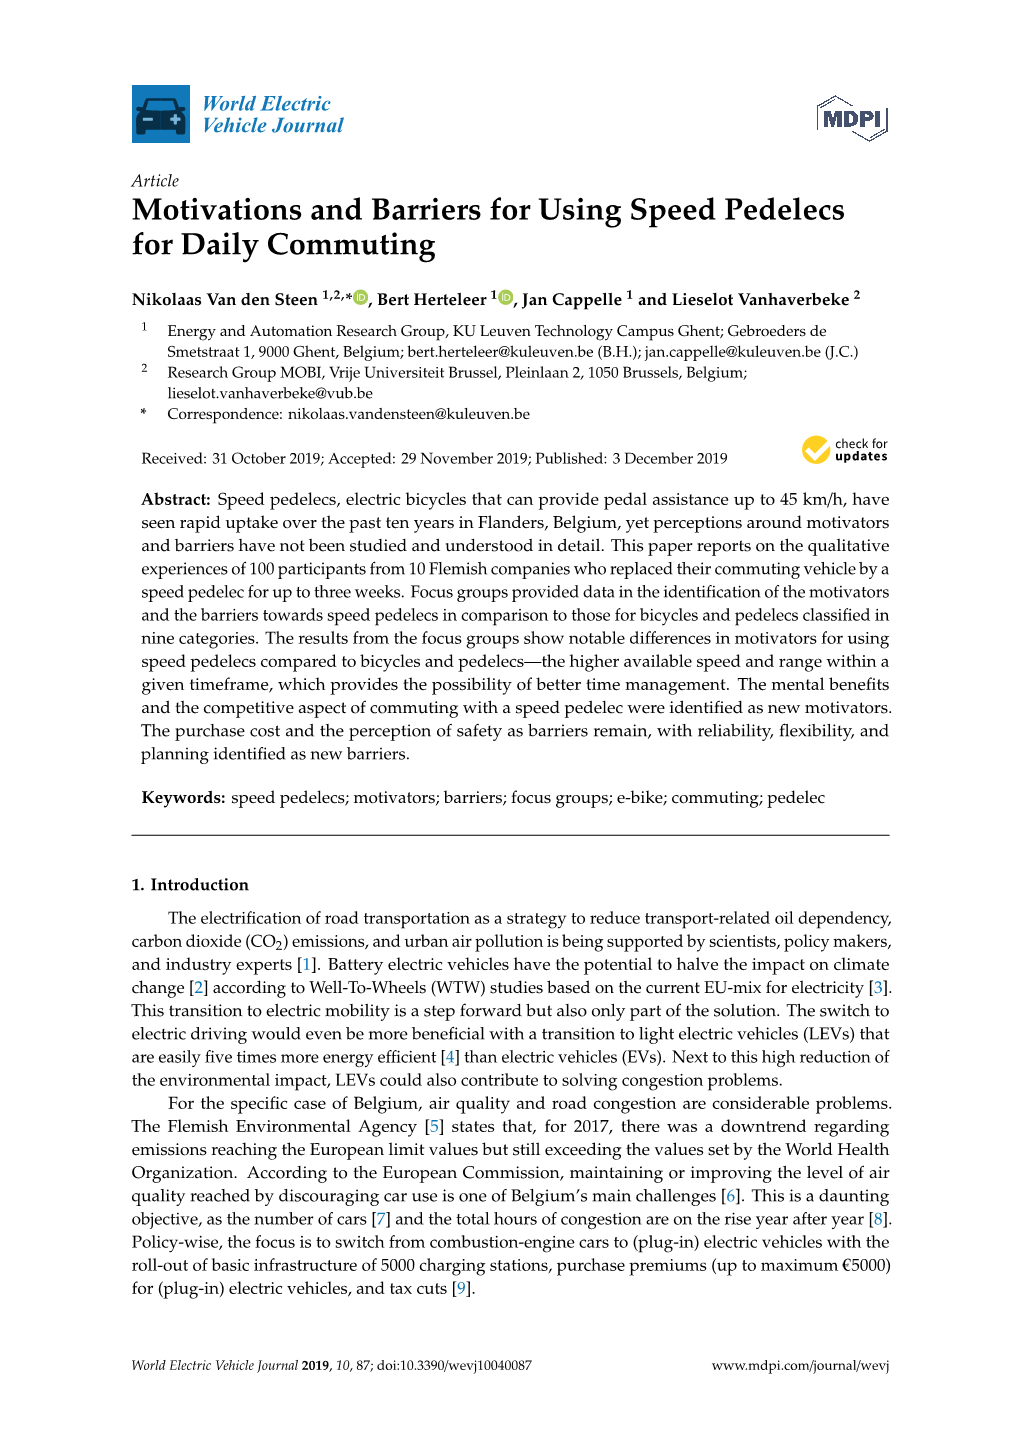 Motivations and Barriers for Using Speed Pedelecs for Daily Commuting